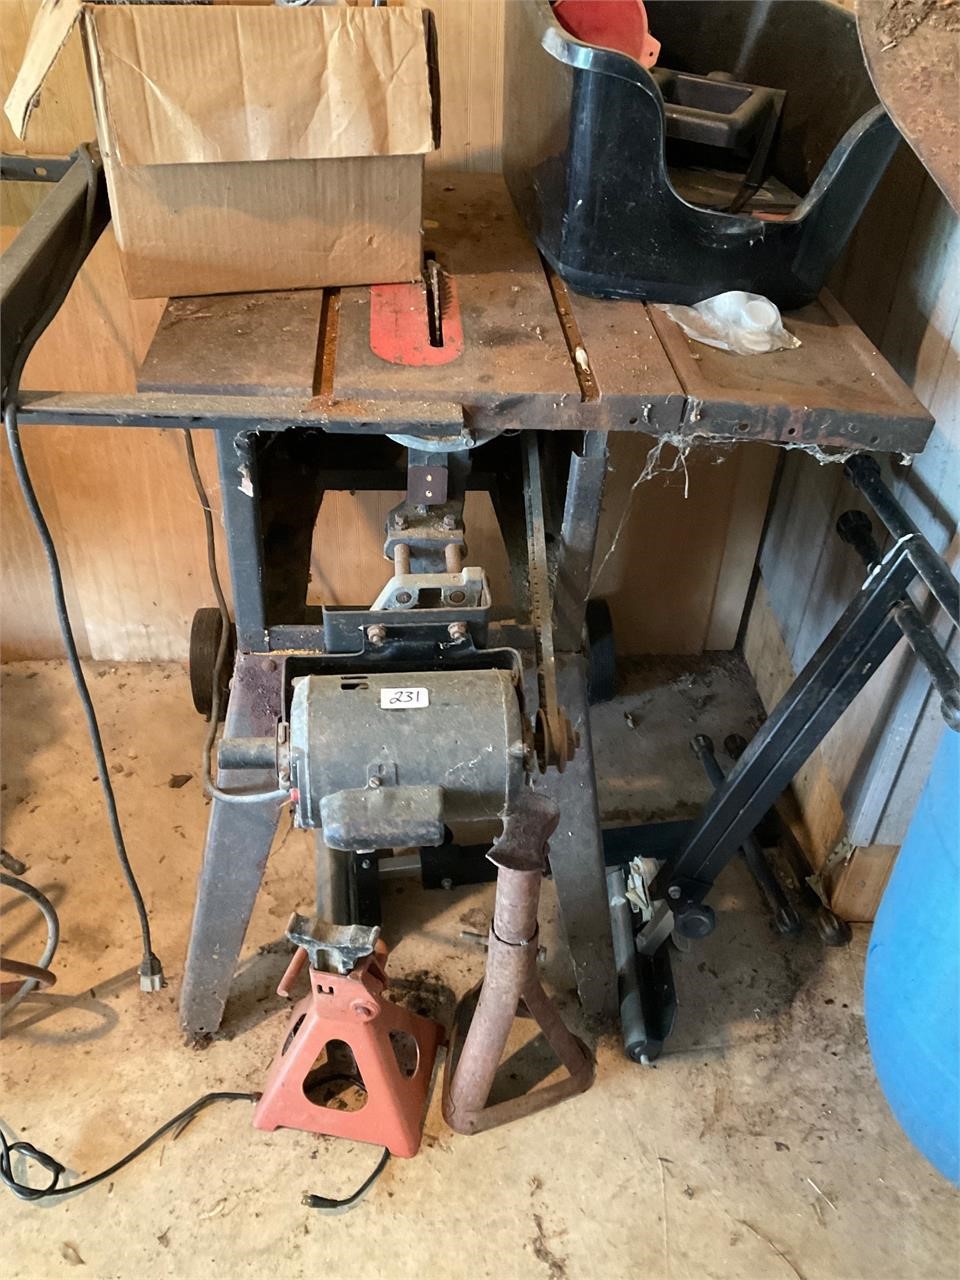 Table saw rollers , jacks and other